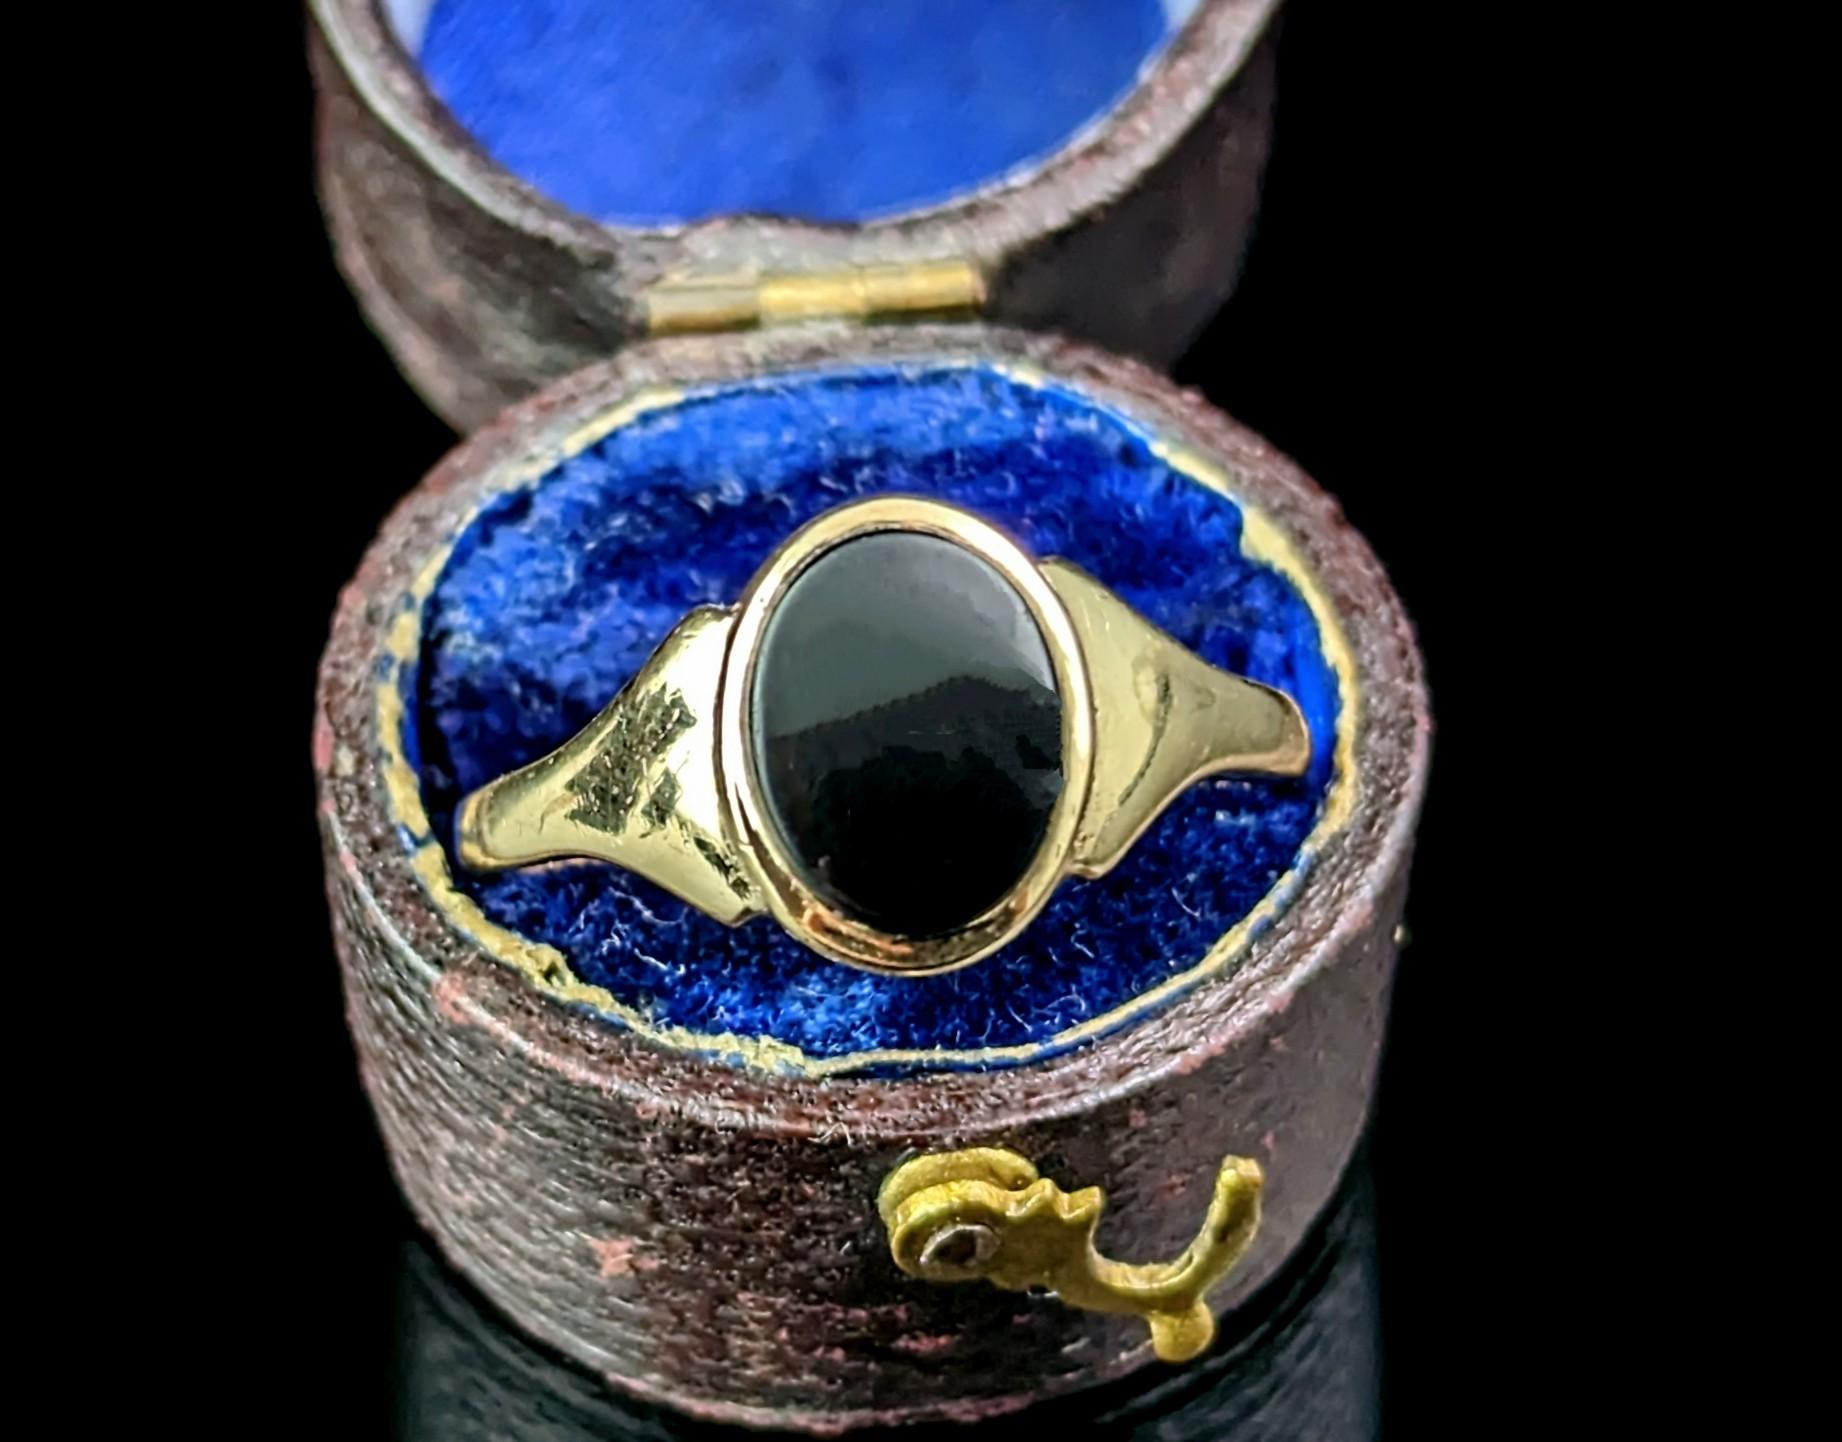 This stylish vintage 9ct gold and Black onyx signet ring is the perfect pinky ring choice!

It has an oval shaped face set with a rich inky black onyx stone, this has not been carved so the stone could be personalised if desired with your initials